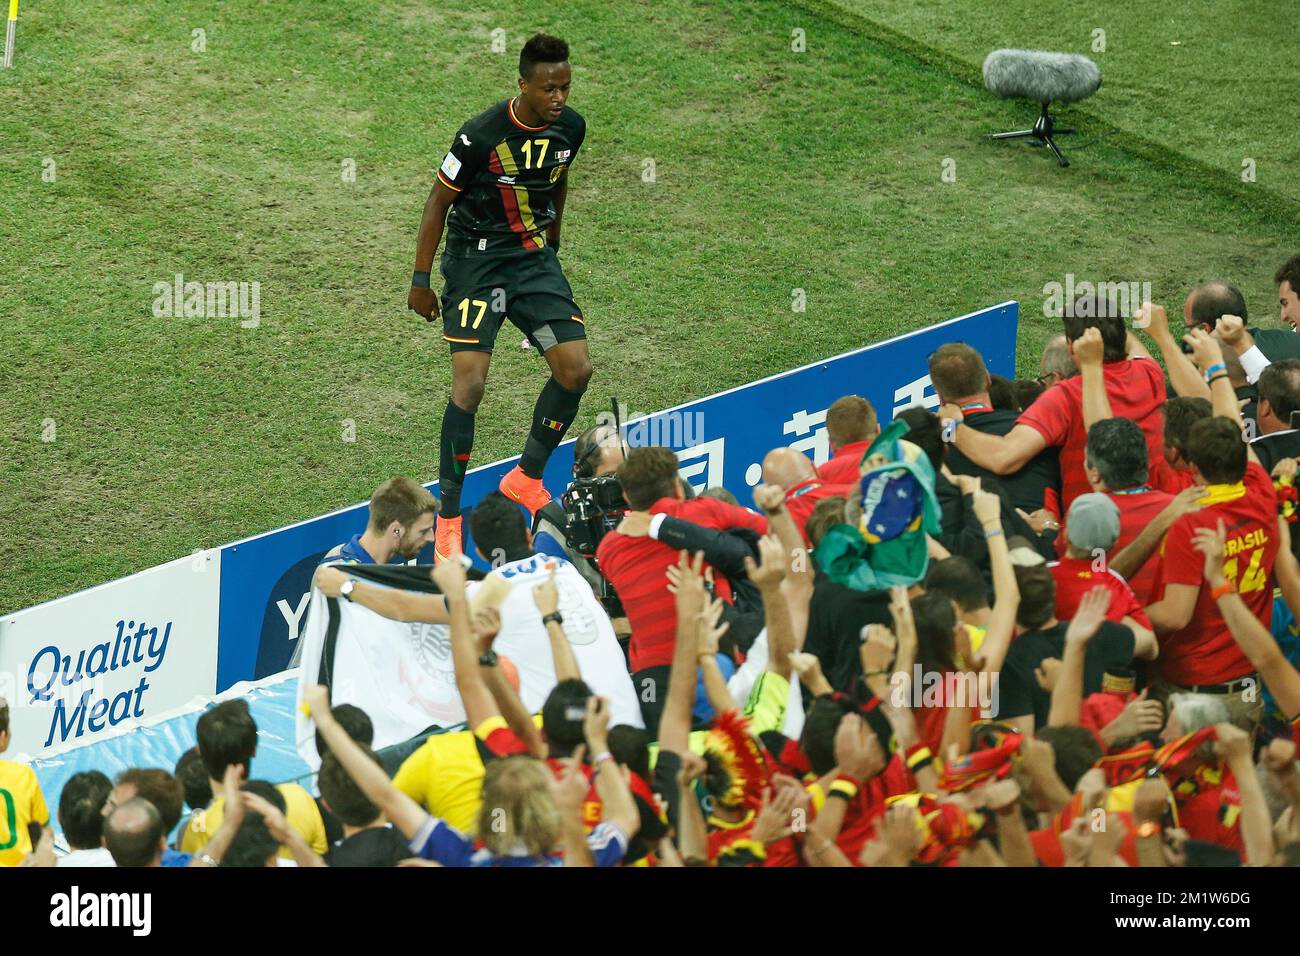 20140626 - SAO PAULO, BRAZIL: Belgium's Divock Origi came to celebrate with Jan Vertonghen who scored the 0-1 goal at the match between Belgian national soccer team Red Devils and South-Korea, third match in group H, in the stadium 'Arena de Sao Paulo', in Itaquera, Sao Paulo, Brazil, during the 2014 FIFA World Cup, Thursday 26 June 2014. The Red Devils lead their group H with two victories. BELGA PHOTO BRUNO FAHY Stock Photo